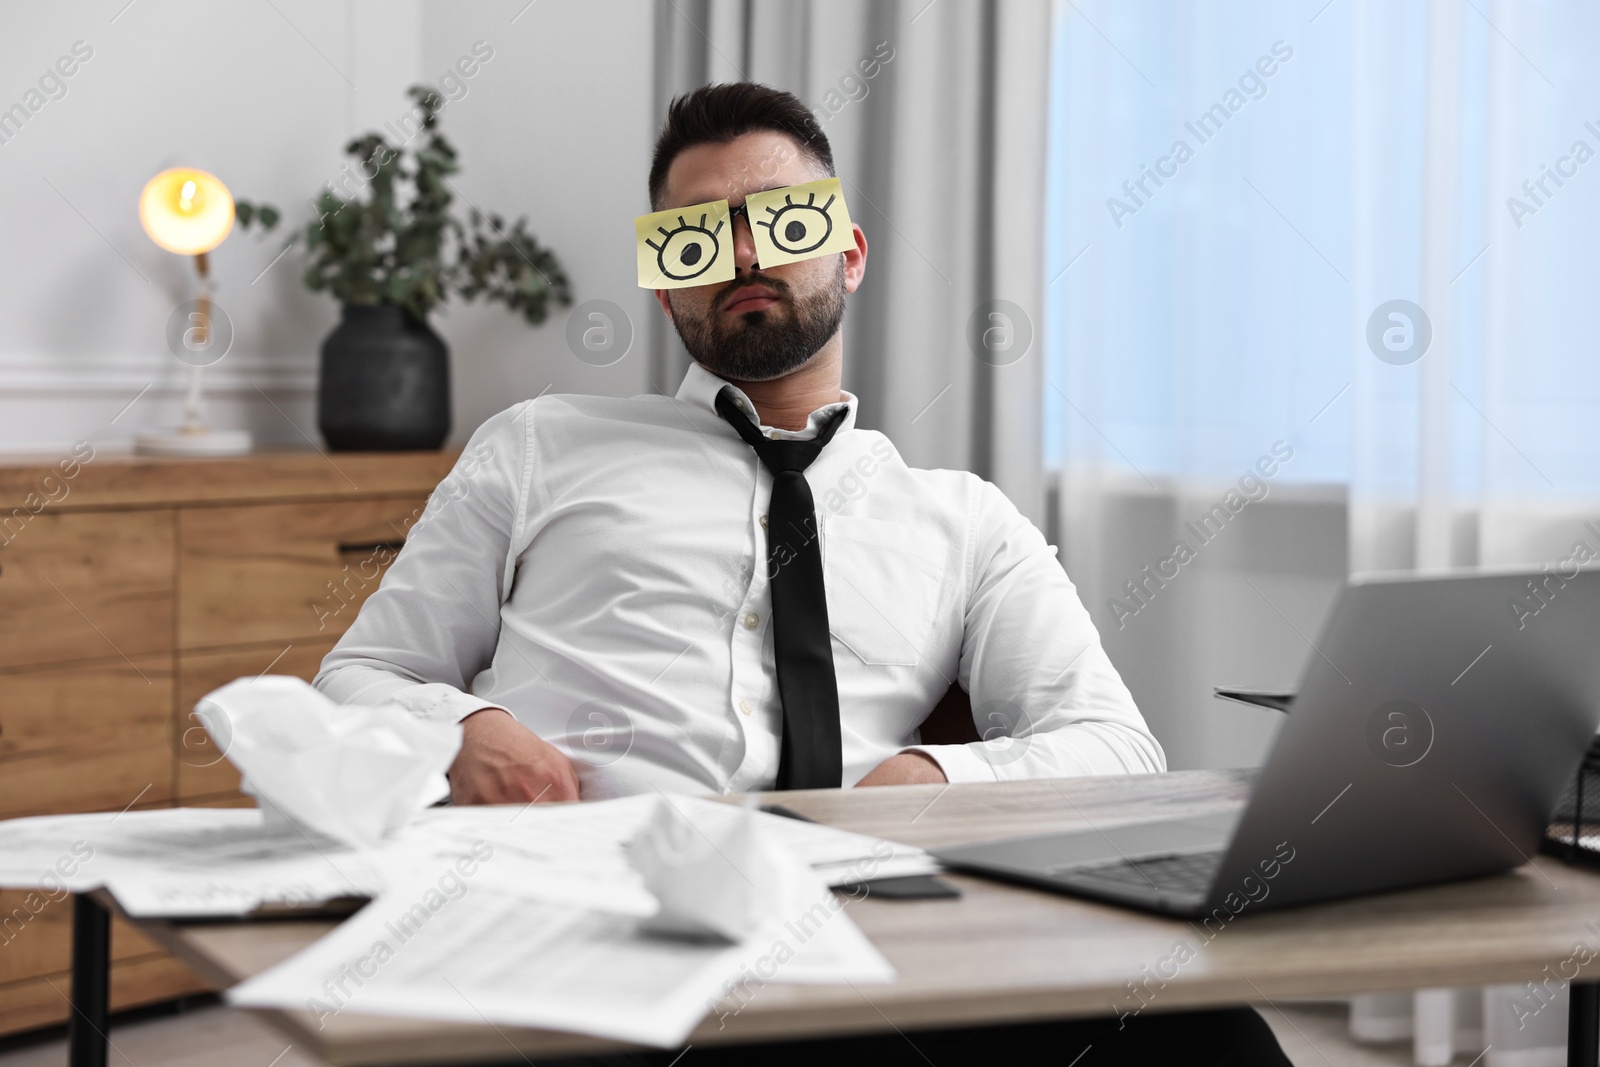 Photo of Man with fake eyes painted on sticky notes at workplace in office. Overwhelmed by work